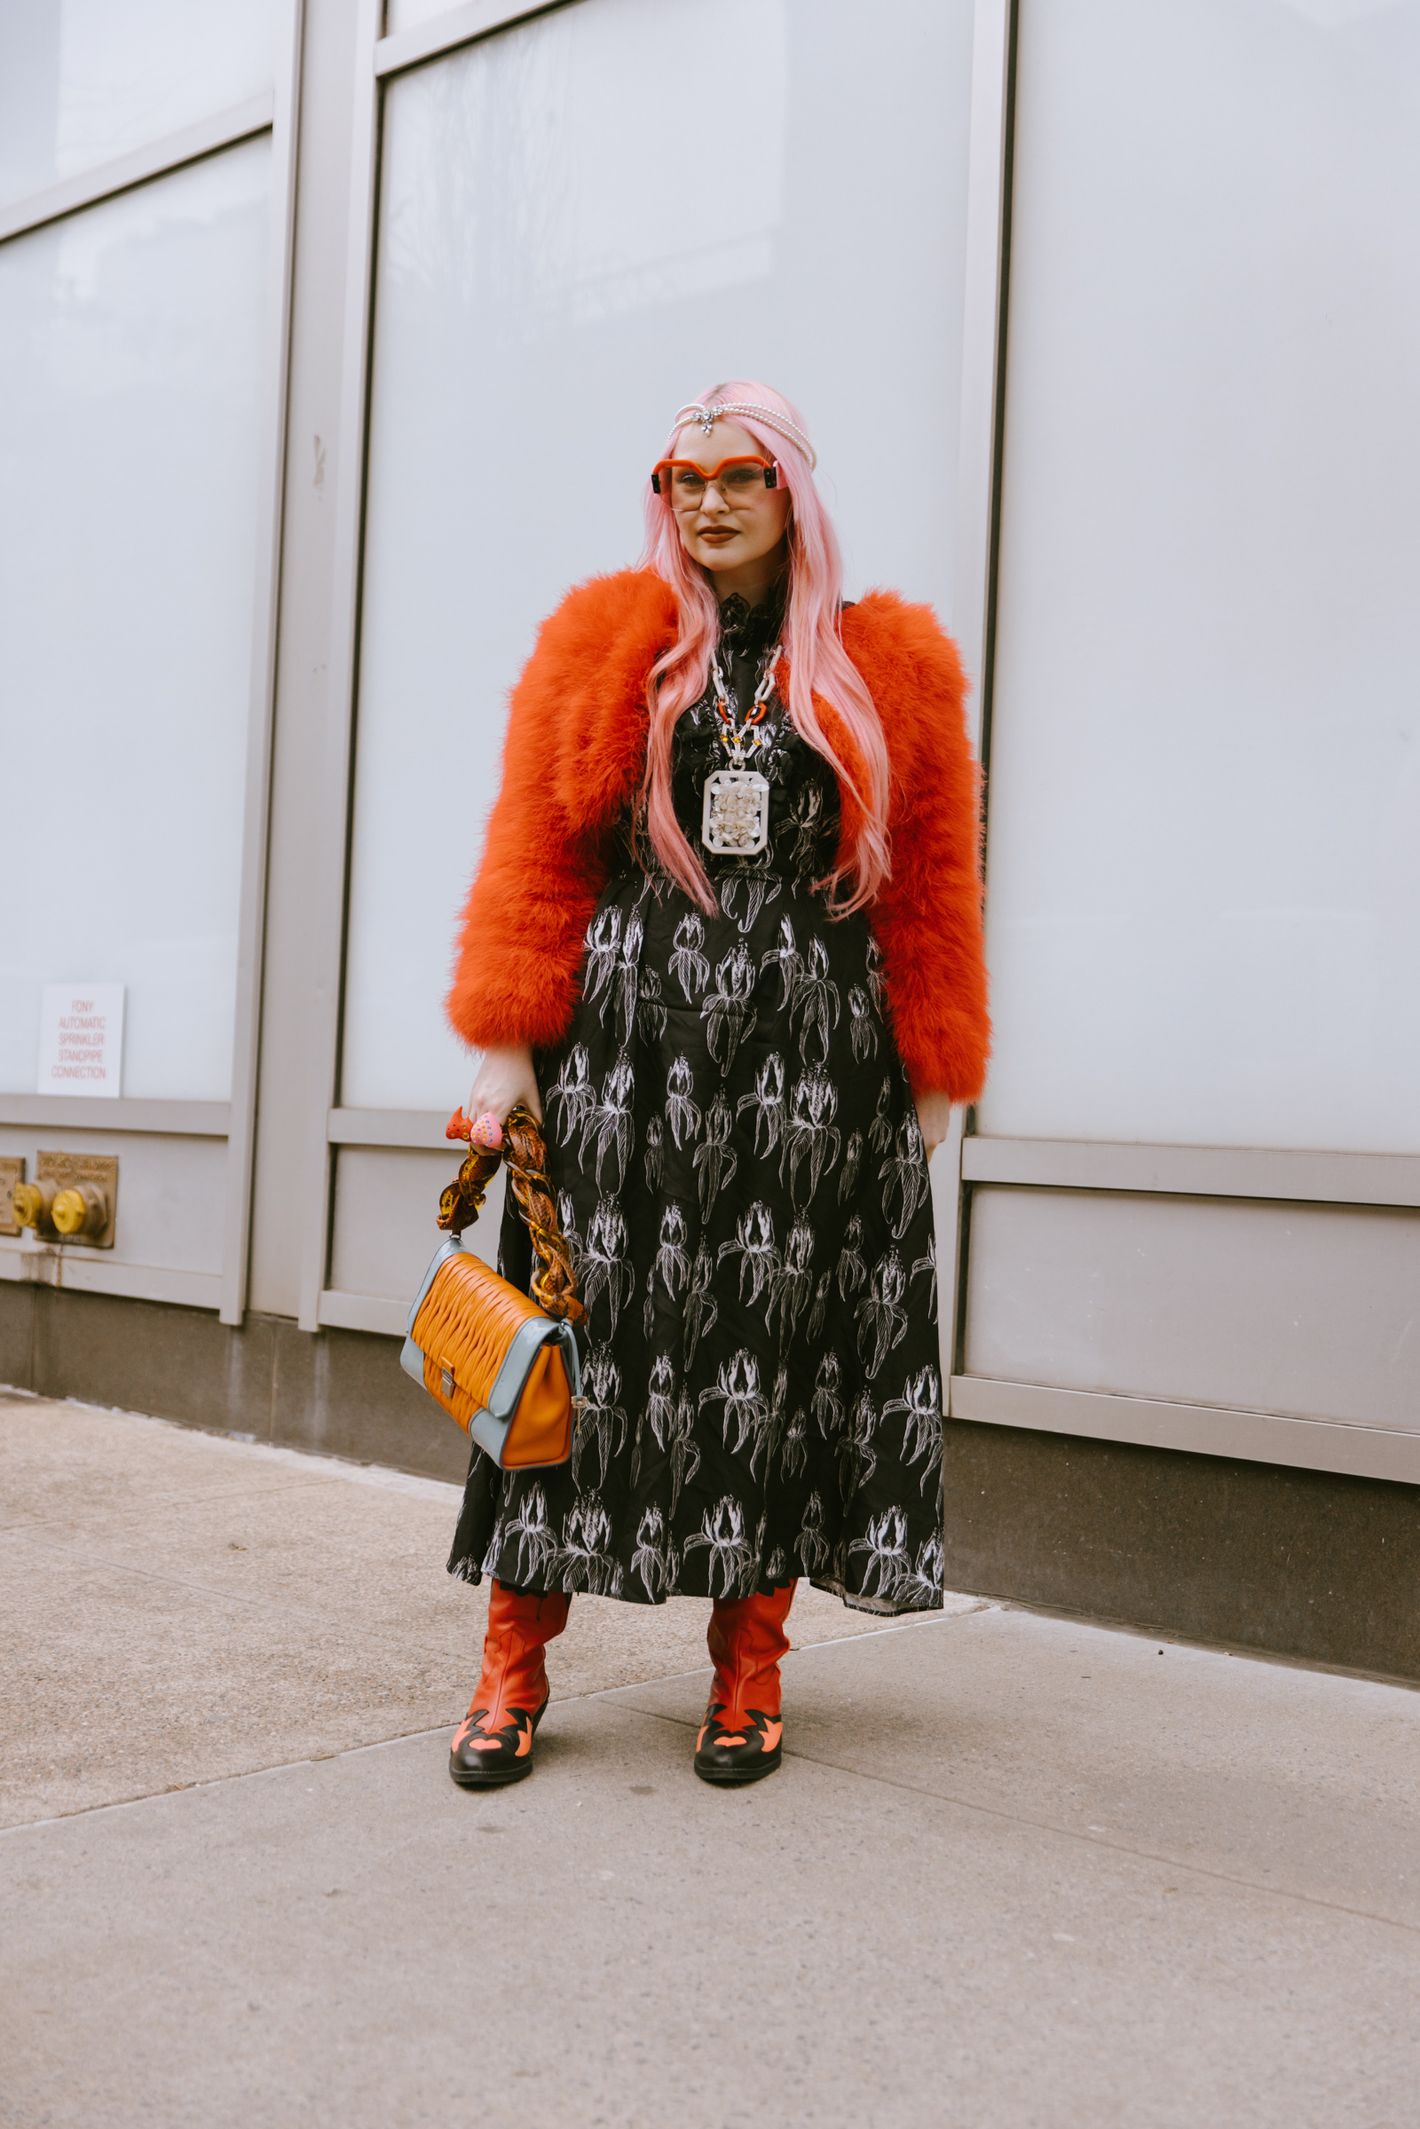 Every Must-See Street Style Outfit From New York Fashion Week  Cool street  fashion, Street style outfit, Street style women